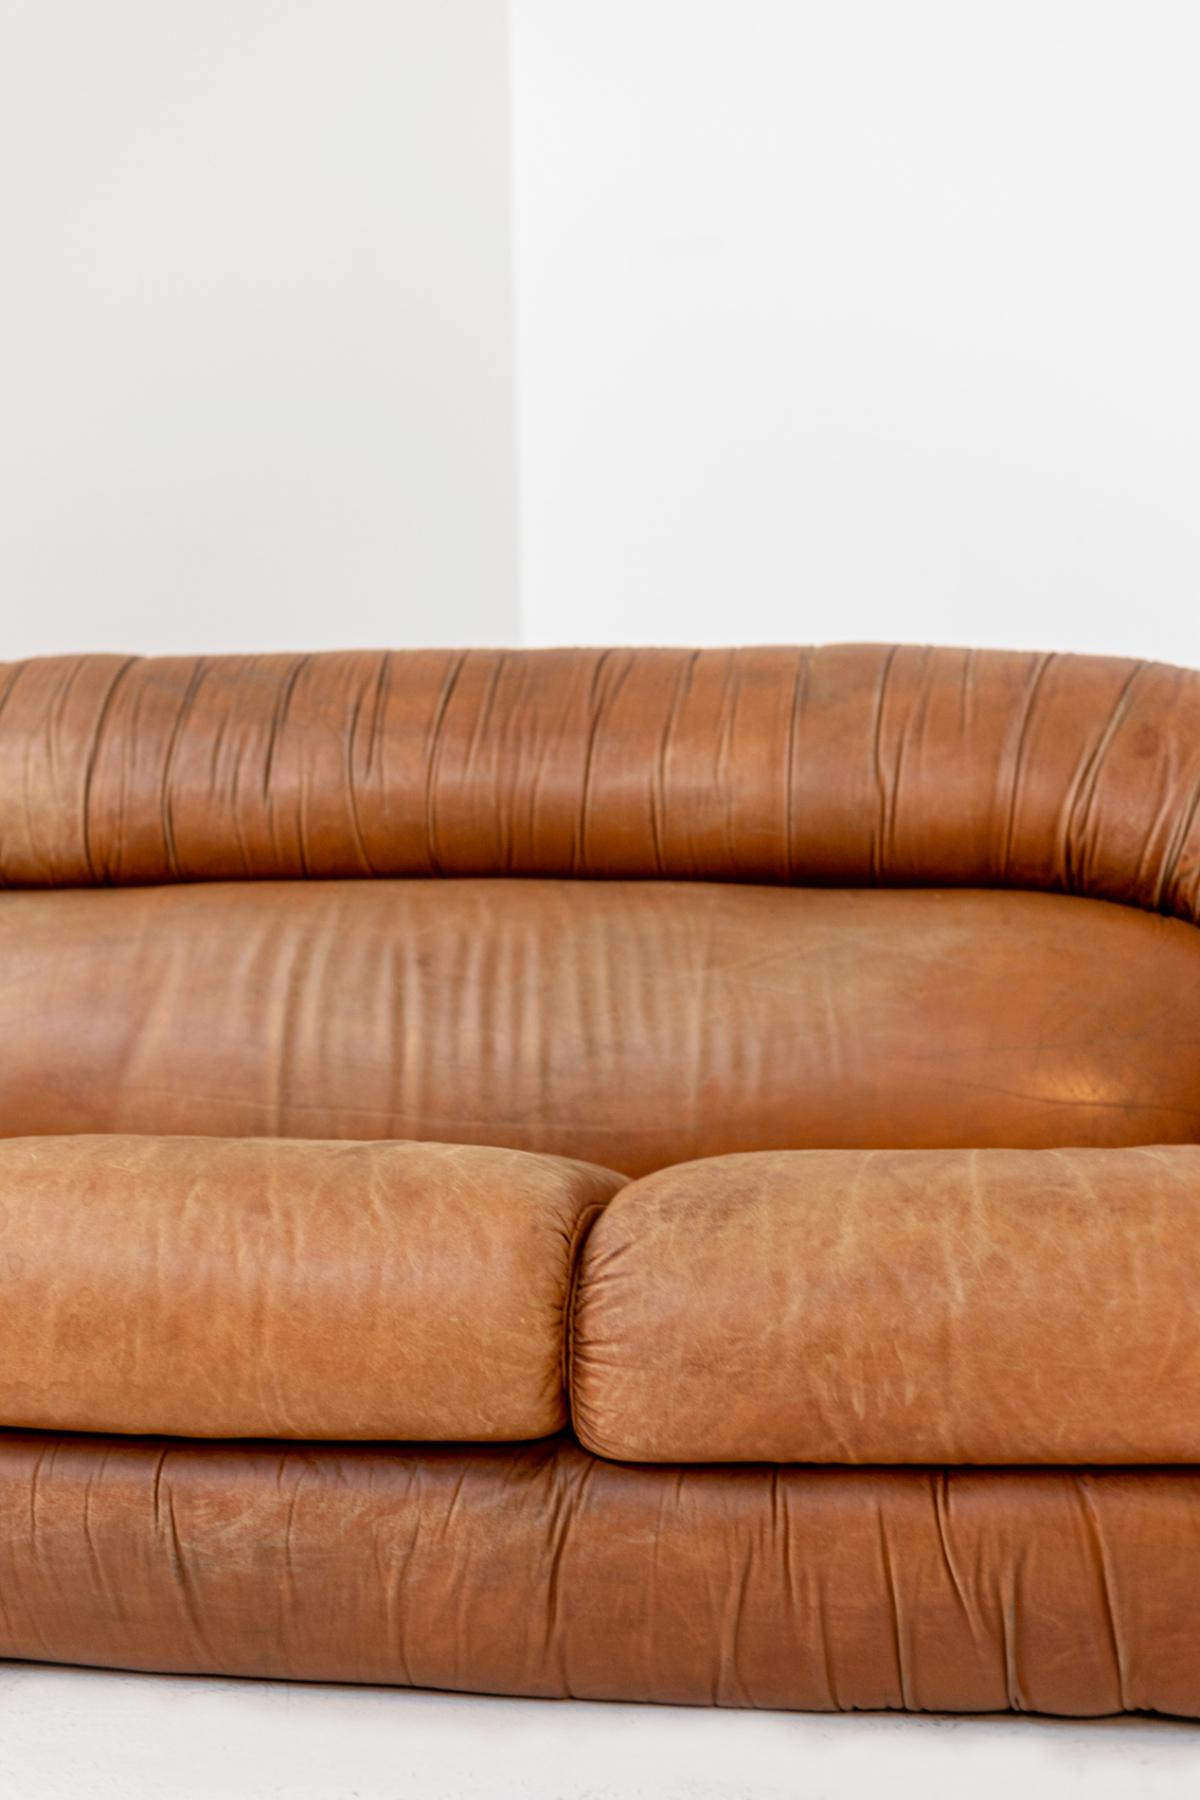 Space Age Brown Leather Sofa with Three Seats 3